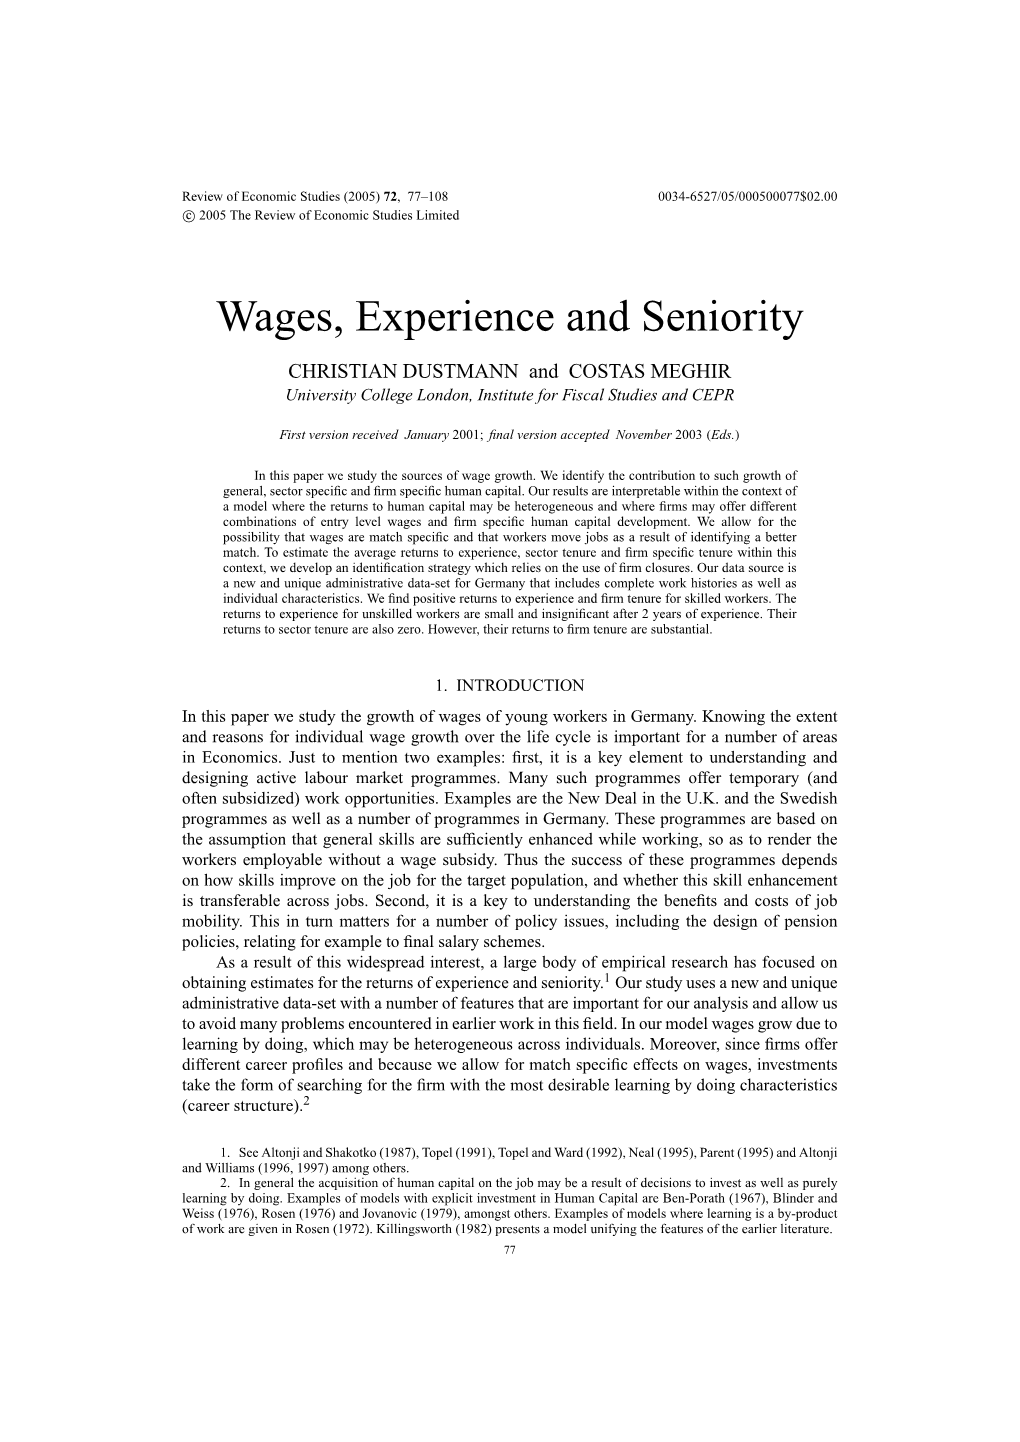 Wages, Experience and Seniority